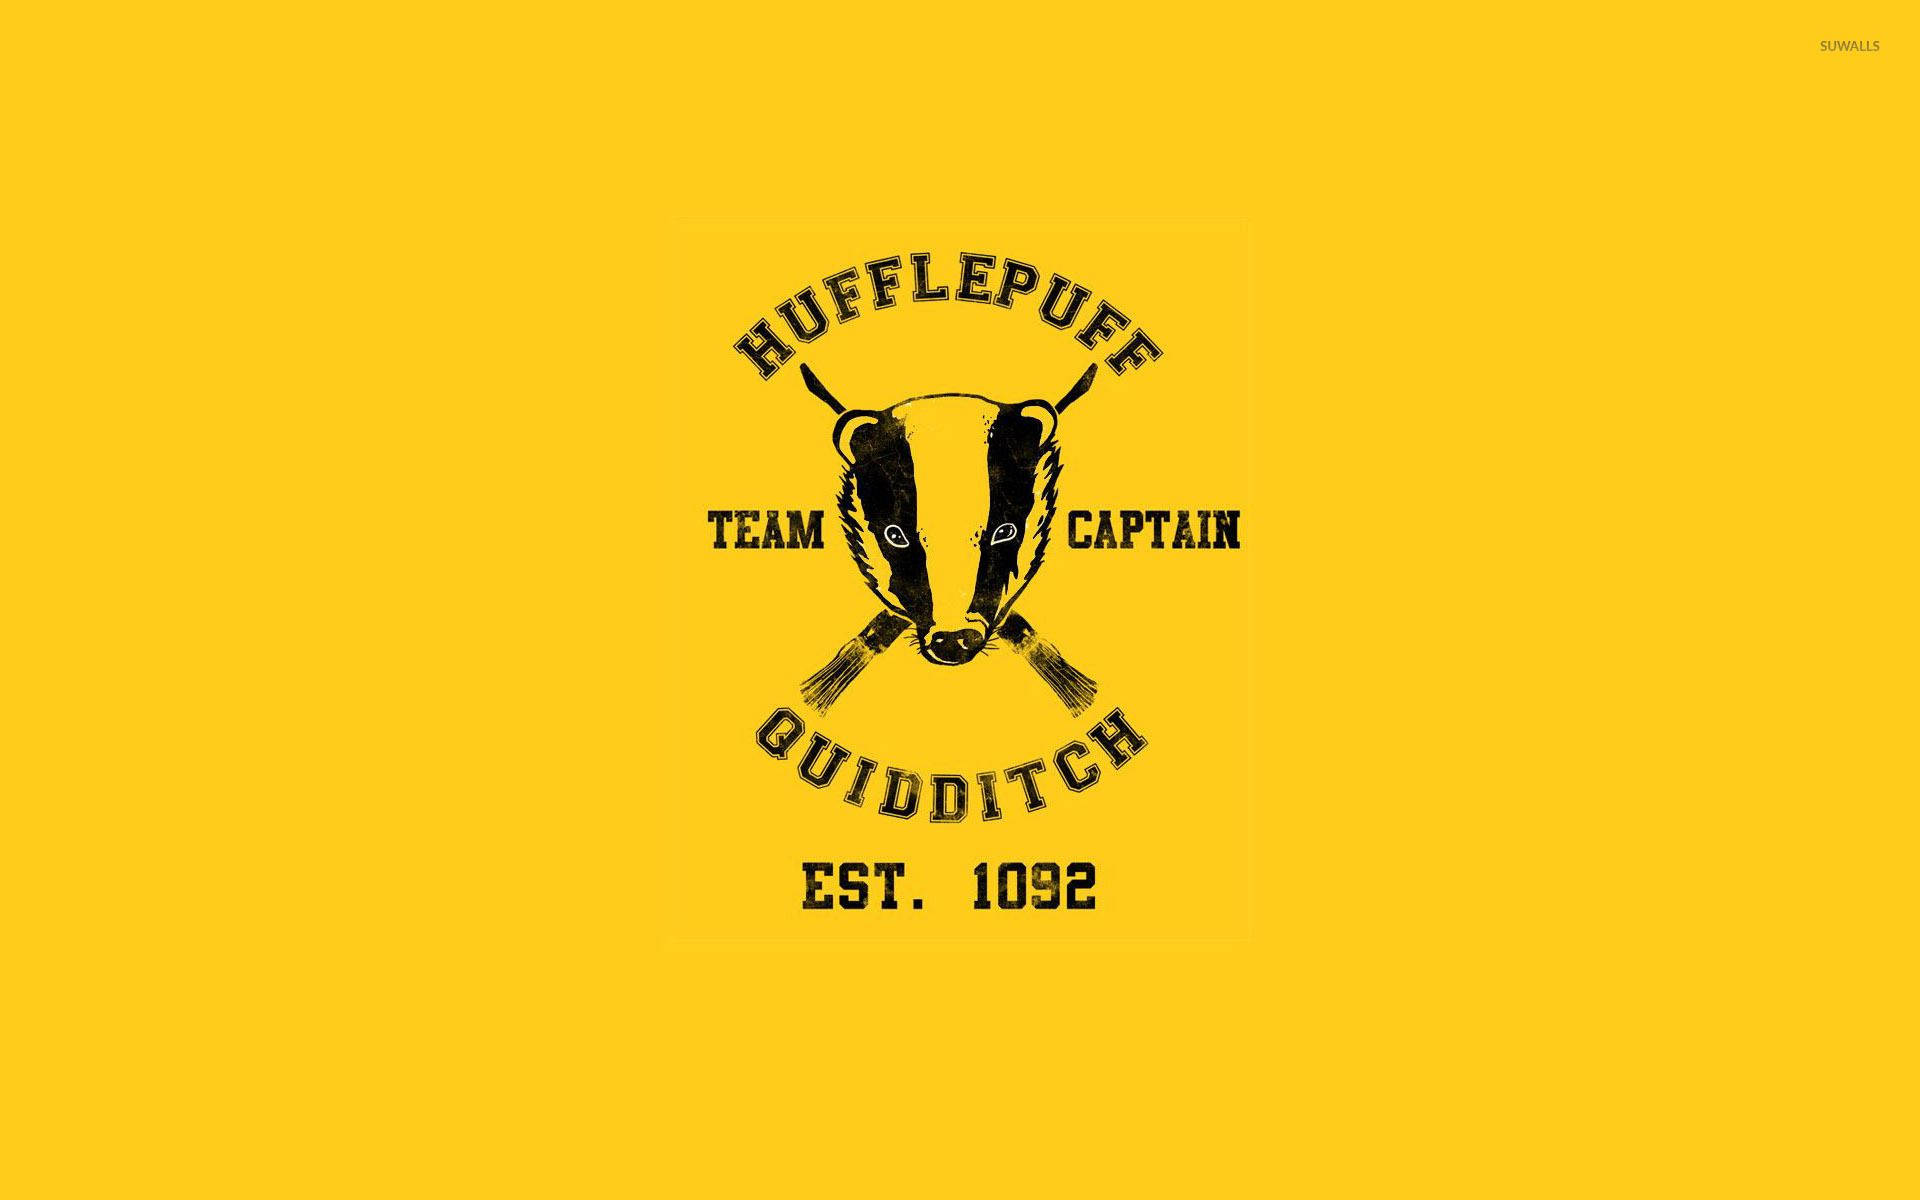 Representing Hufflepuff in a Thrilling Quidditch Match Wallpaper